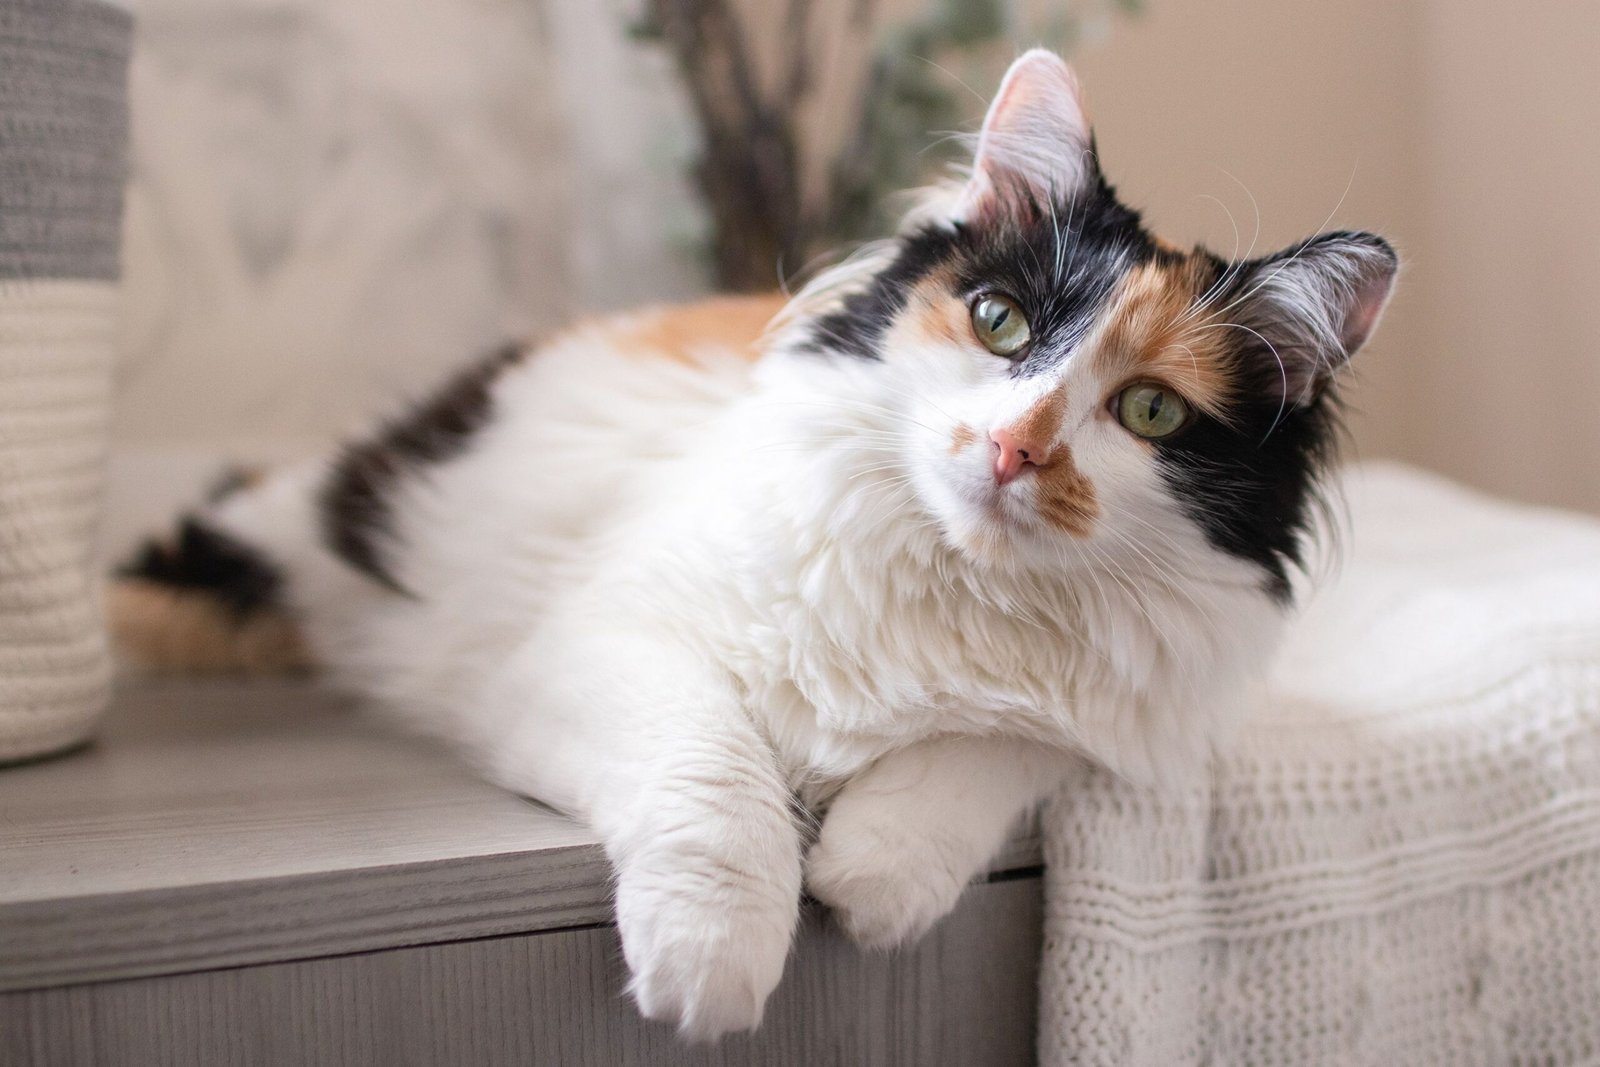 Why Are So Many Calico Cats Female?